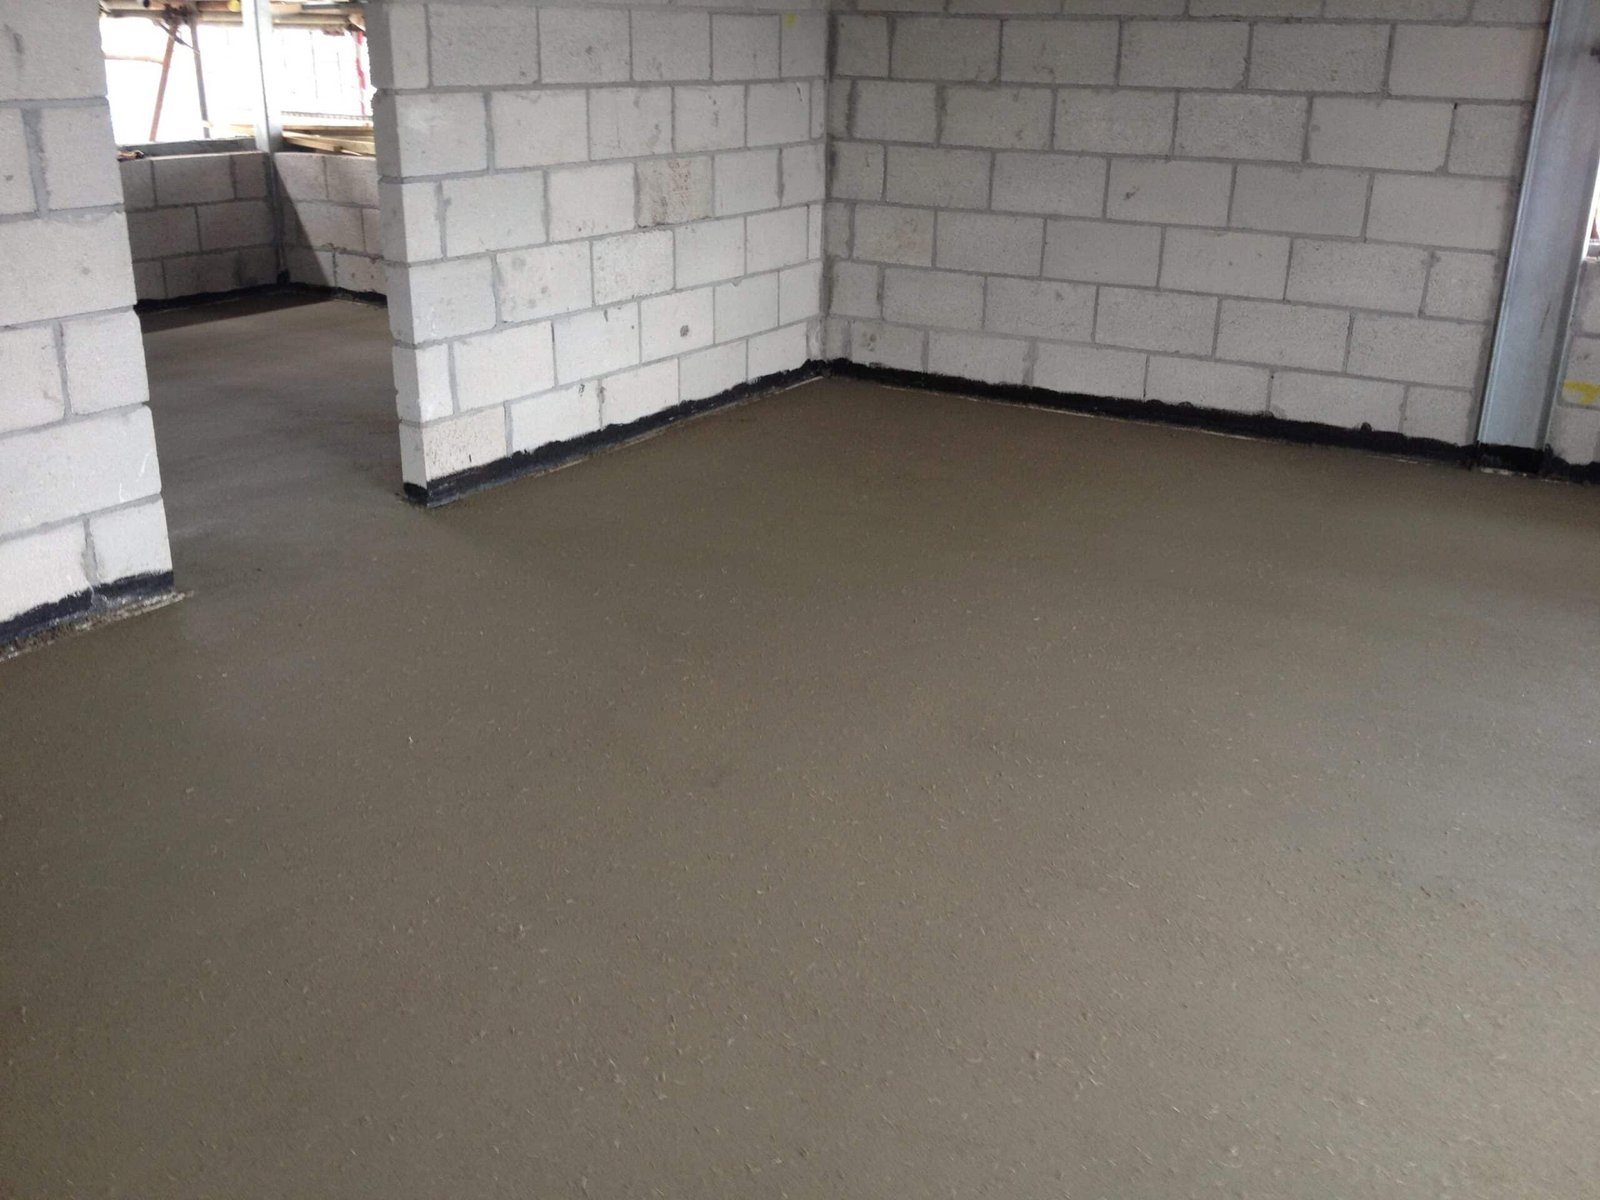 What is the correct mix for floor screed?